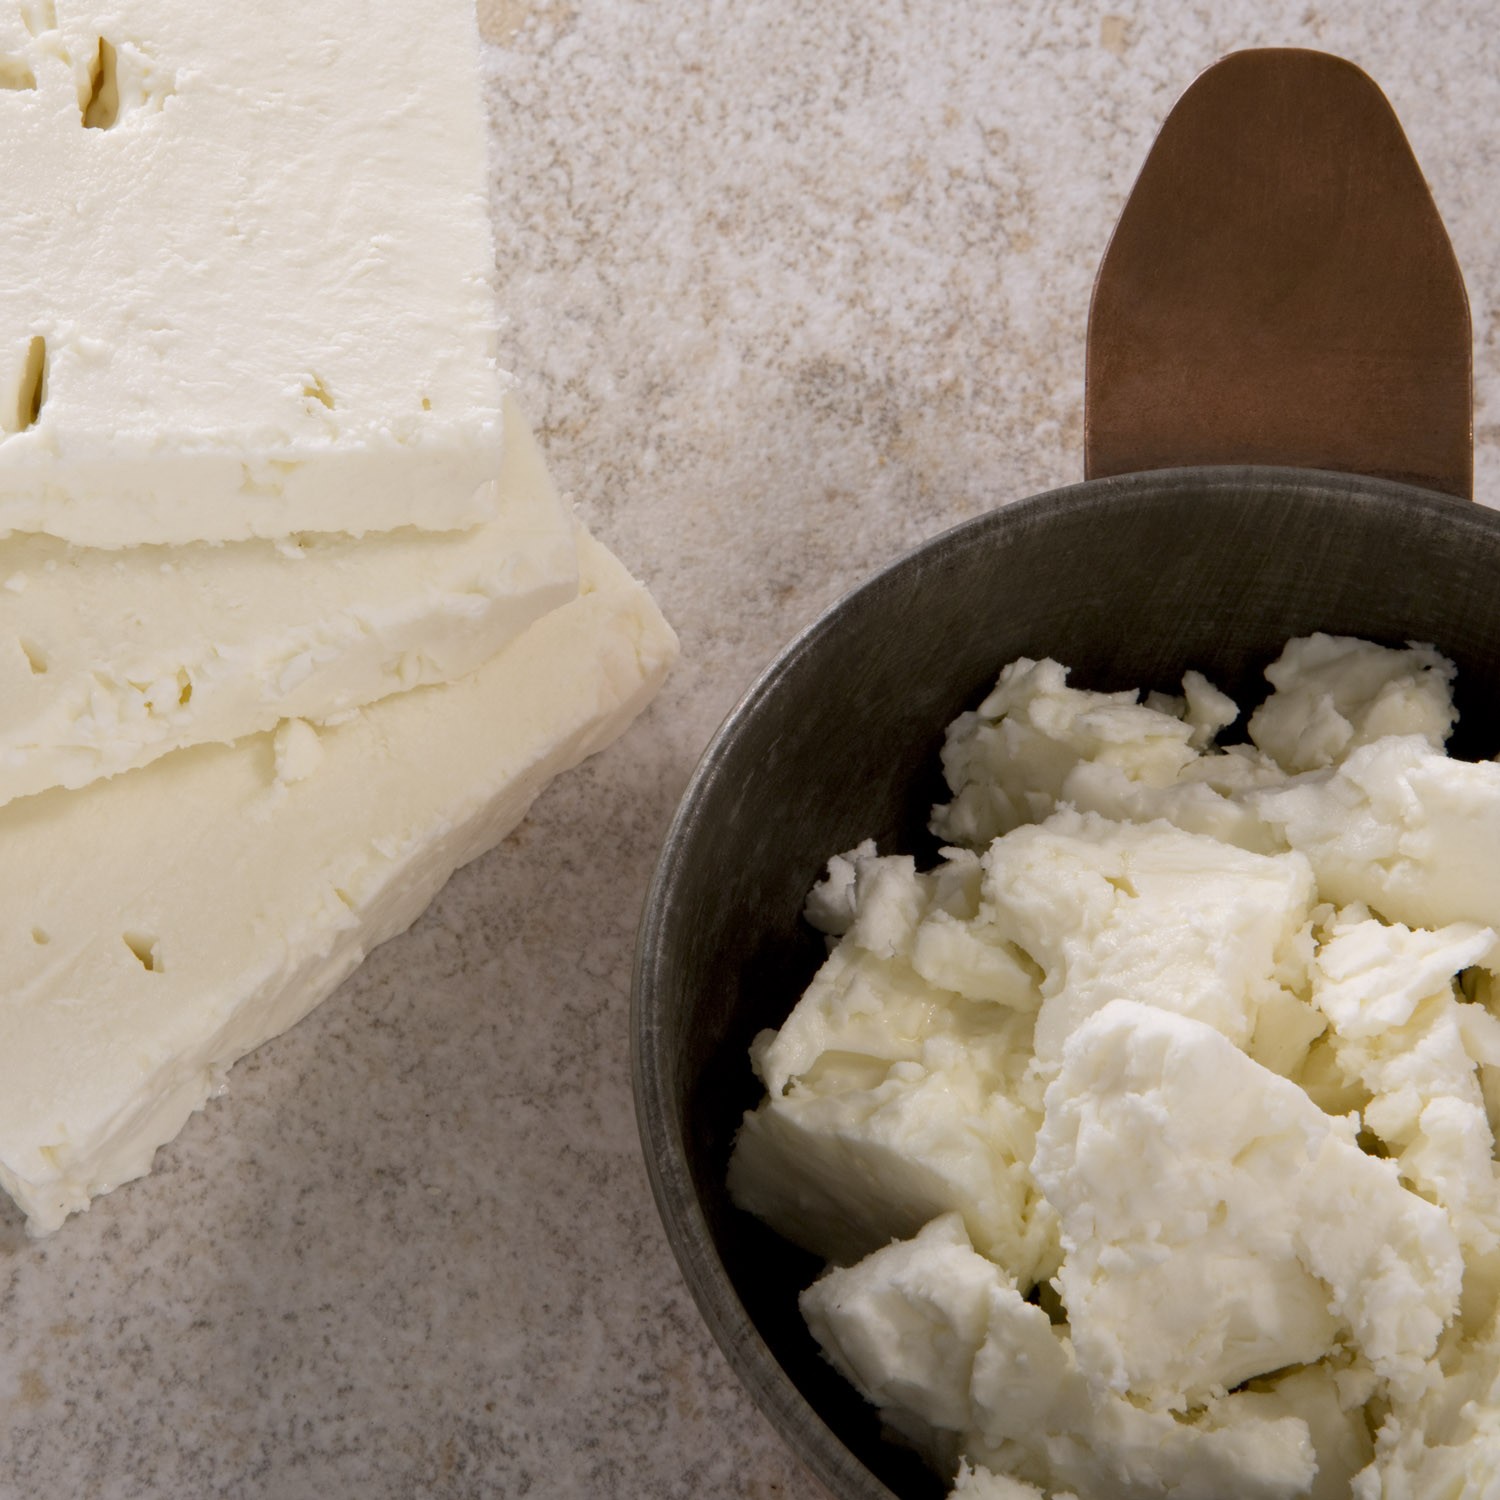 You Feta Believe It: Eat Real Greek Feta to Support Greece (And Because It’s Delicious)